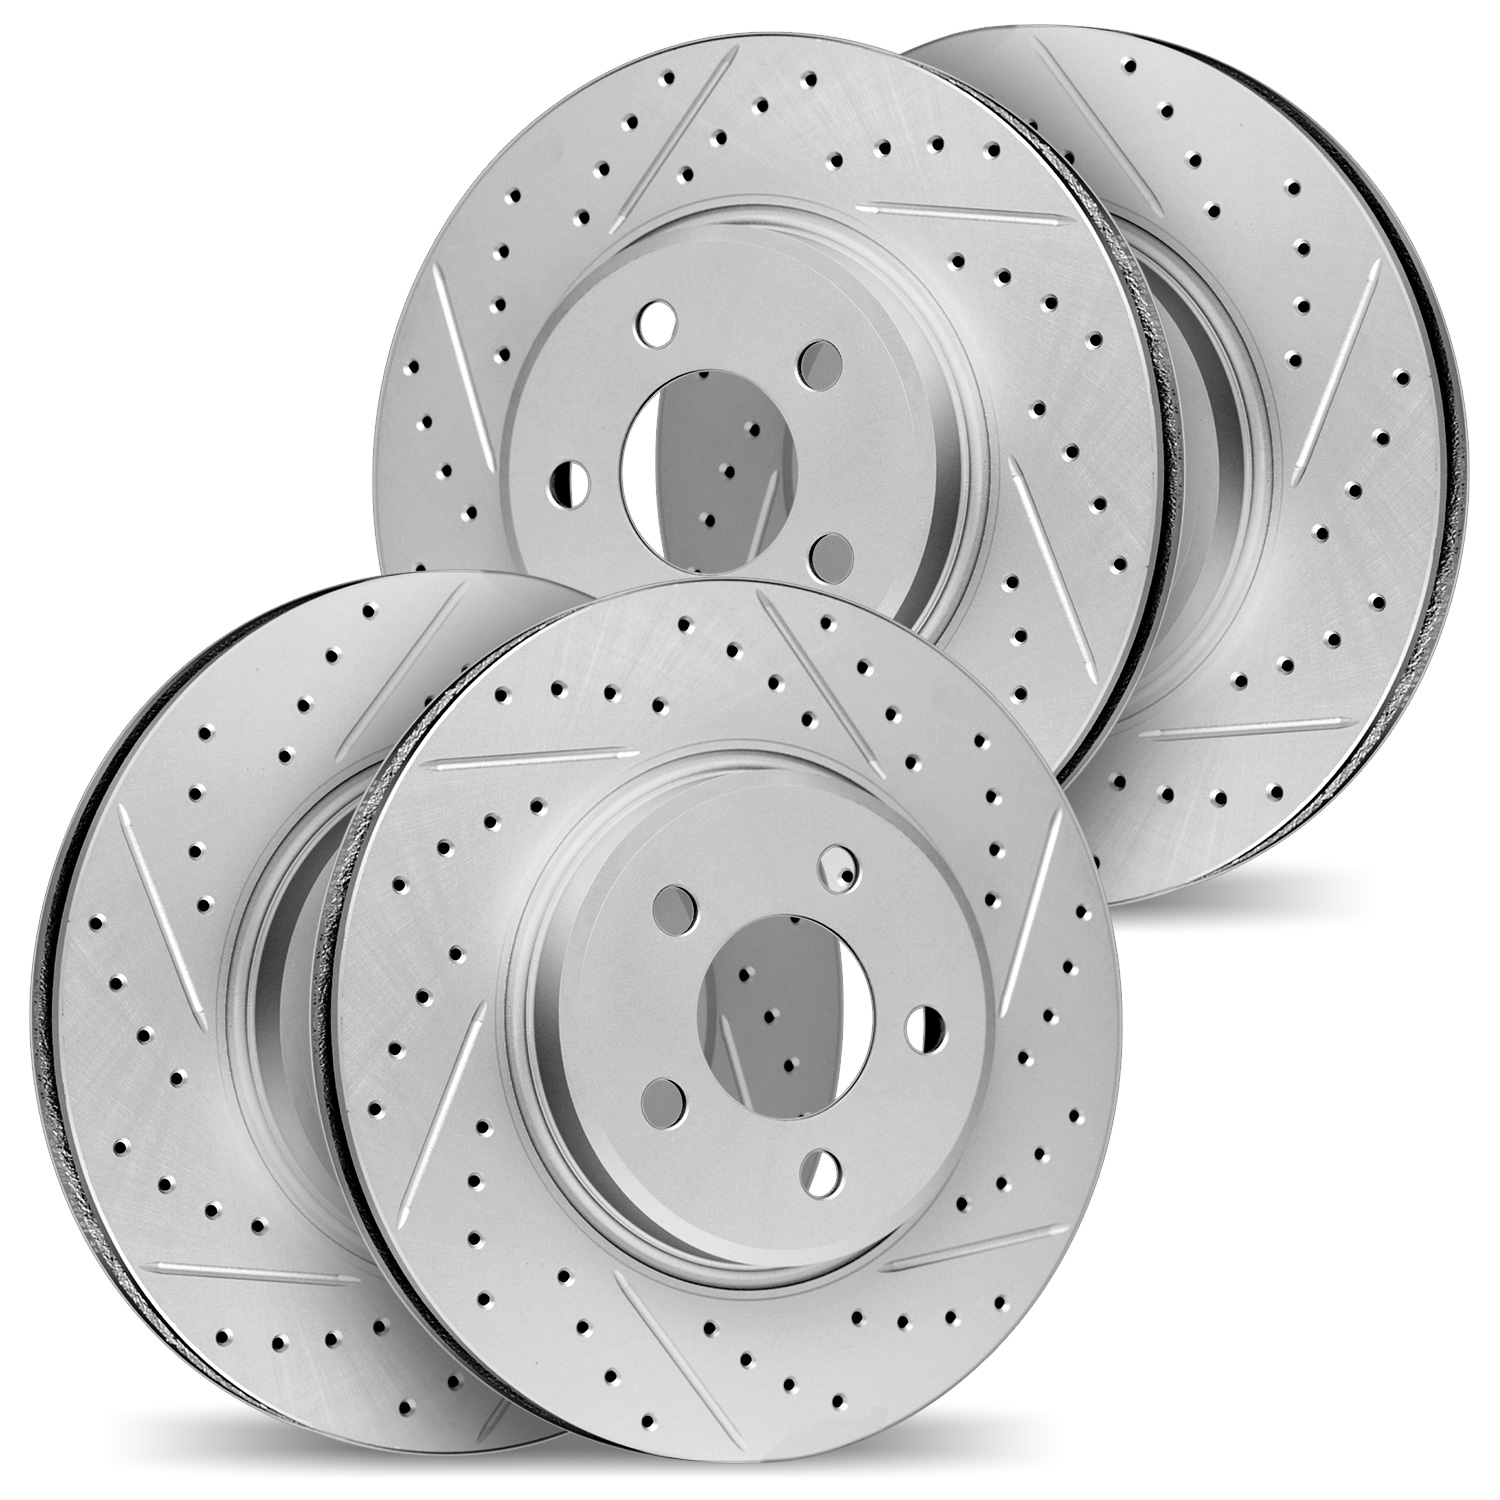 2004-31001 Geoperformance Drilled/Slotted Brake Rotors, 2008-2013 BMW, Position: Front and Rear